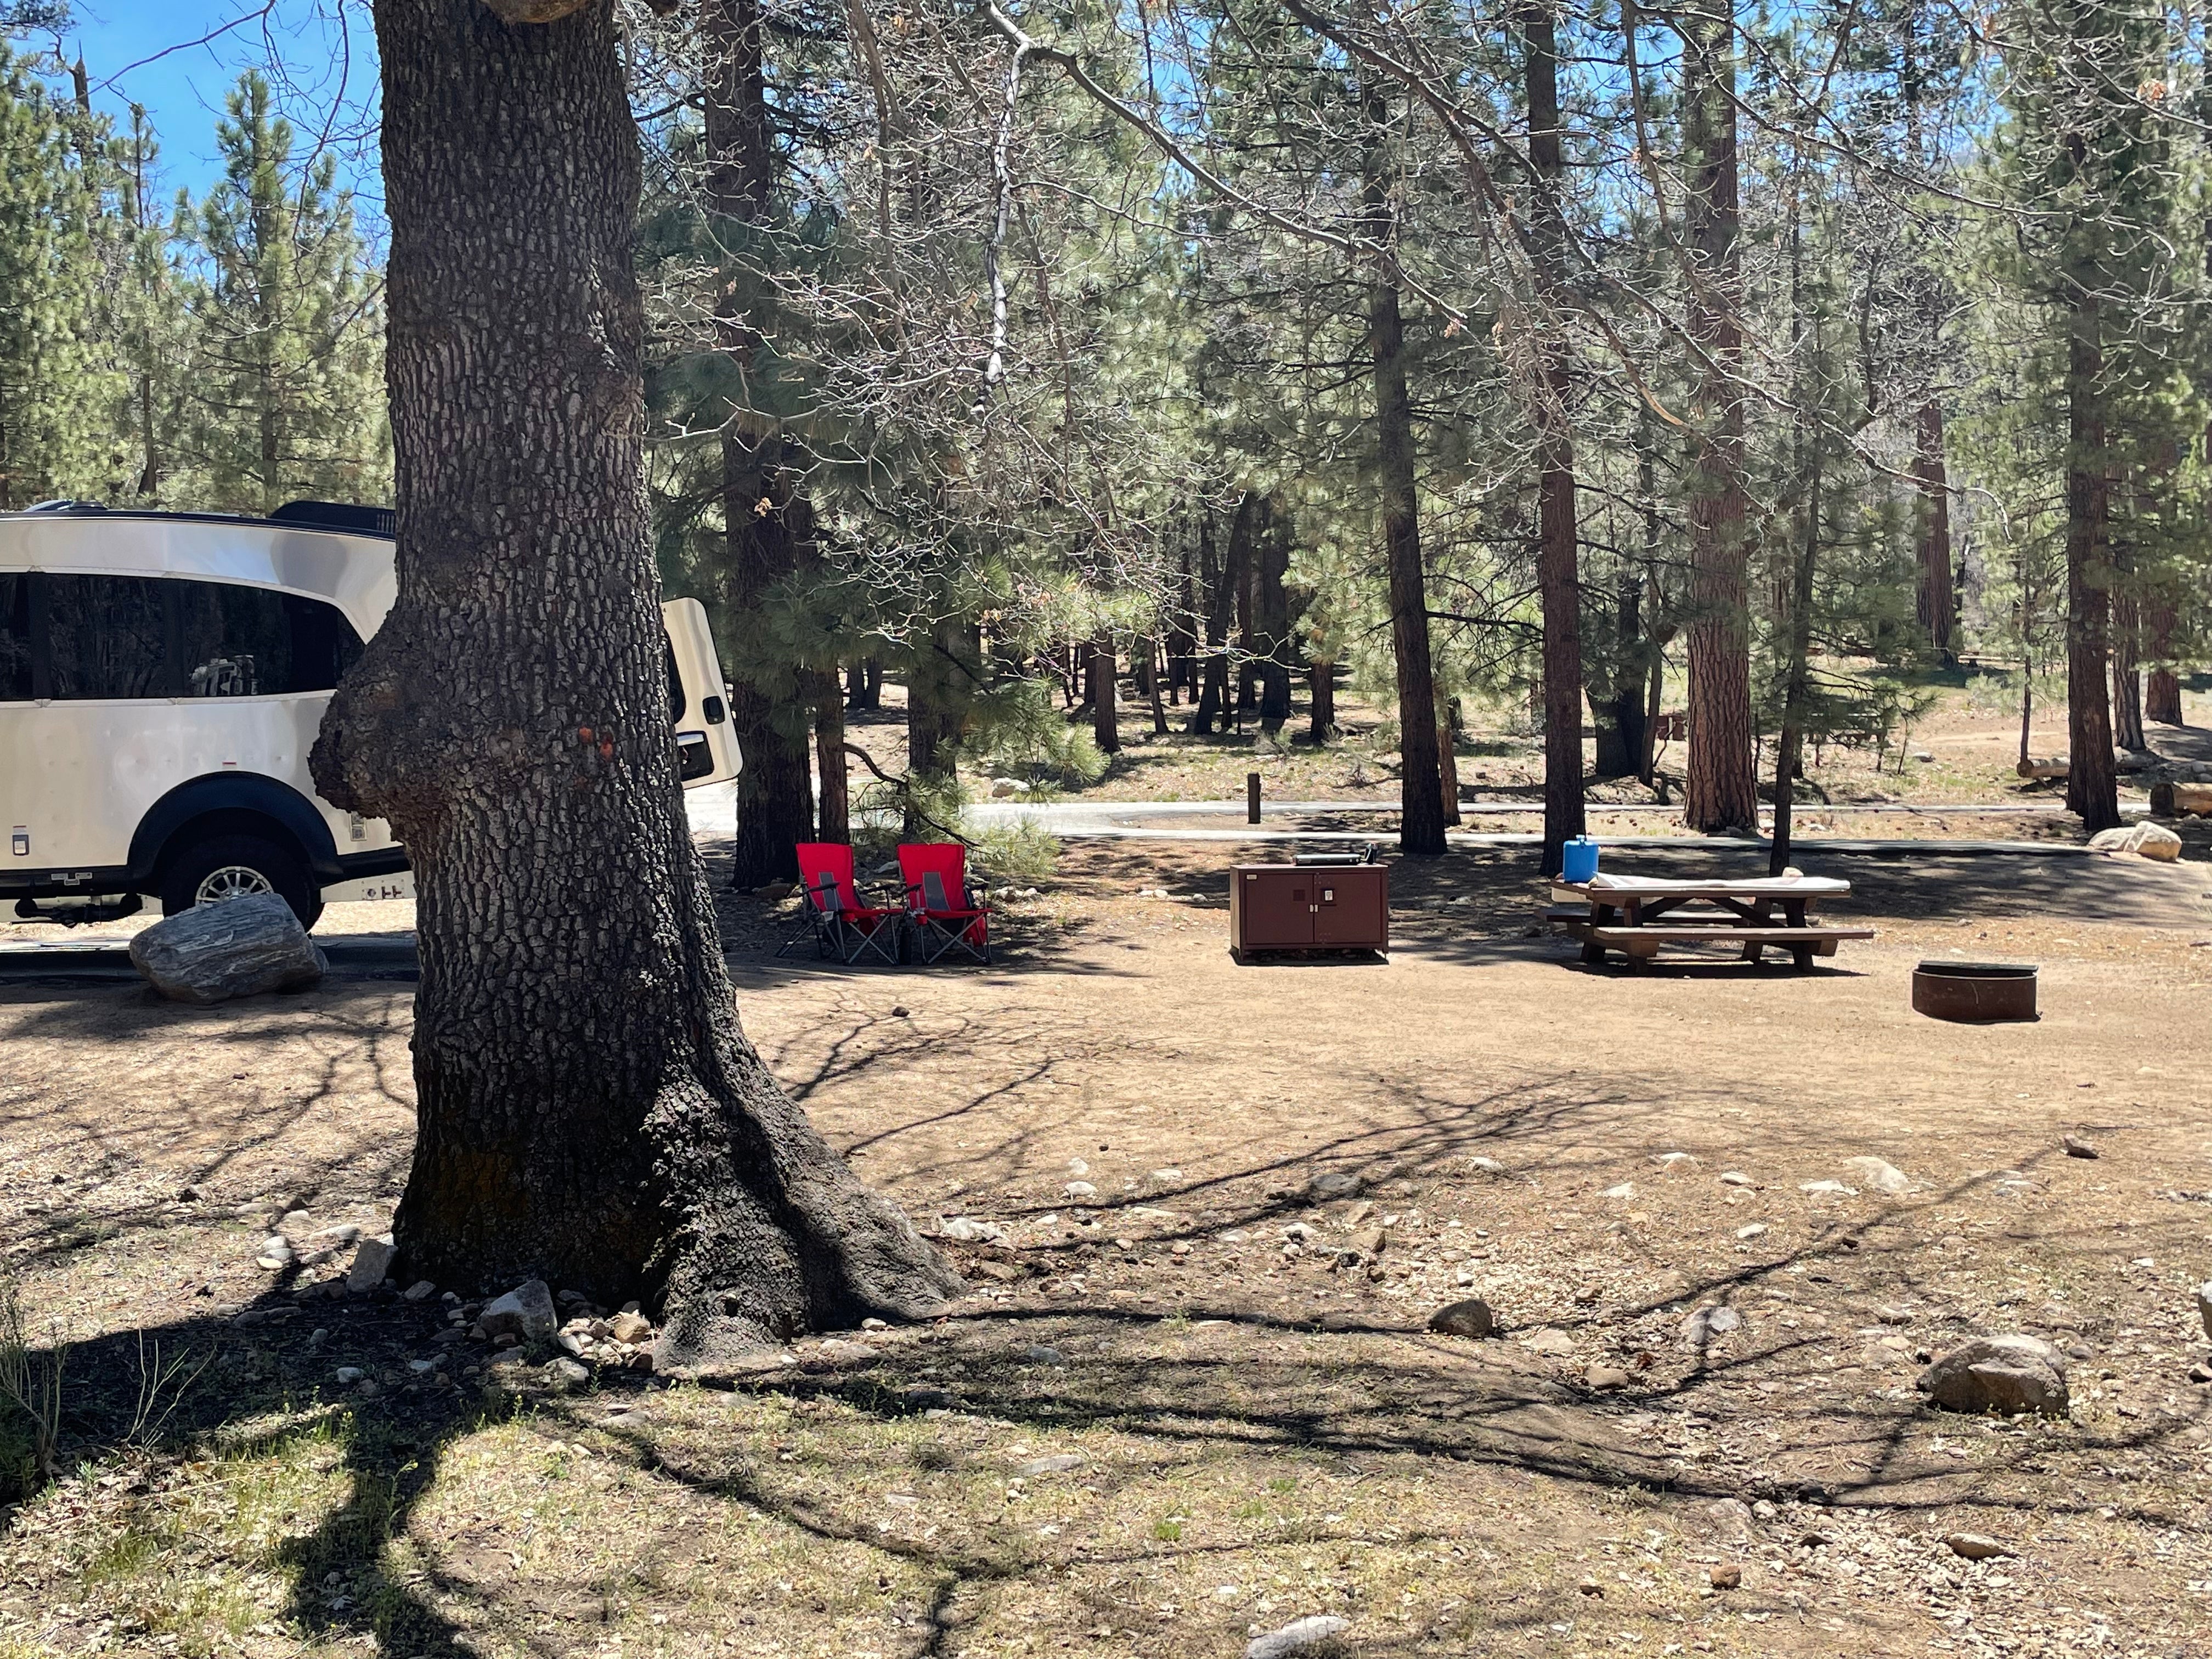 Camper submitted image from Barton Flats Campground - 5